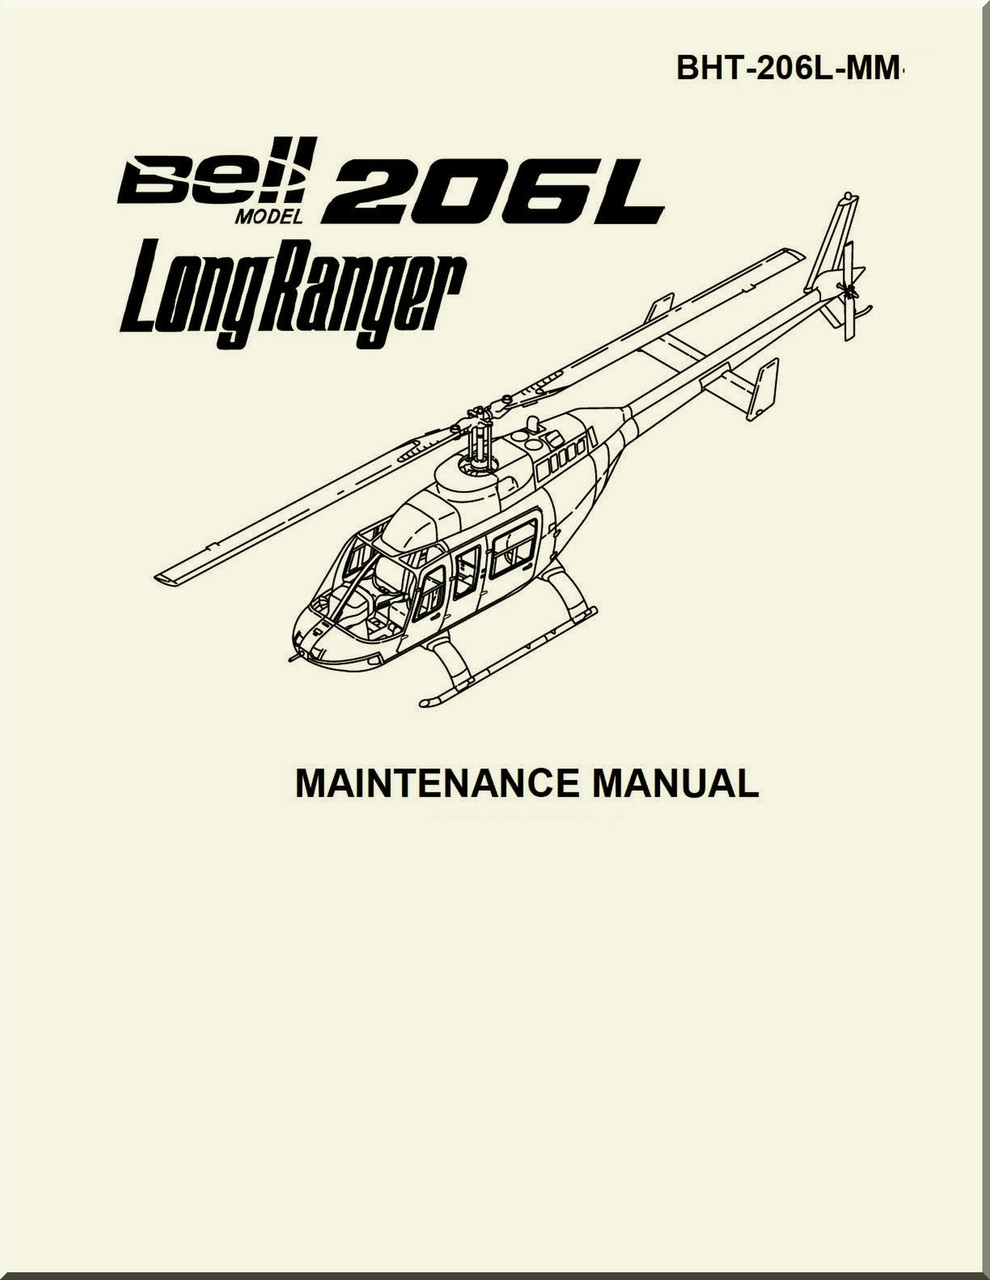 Bell Helicopter 206 L Maintenance Manual - Aircraft Reports - Aircraft  Manuals - Aircraft Helicopter Engines Propellers Blueprints Publications